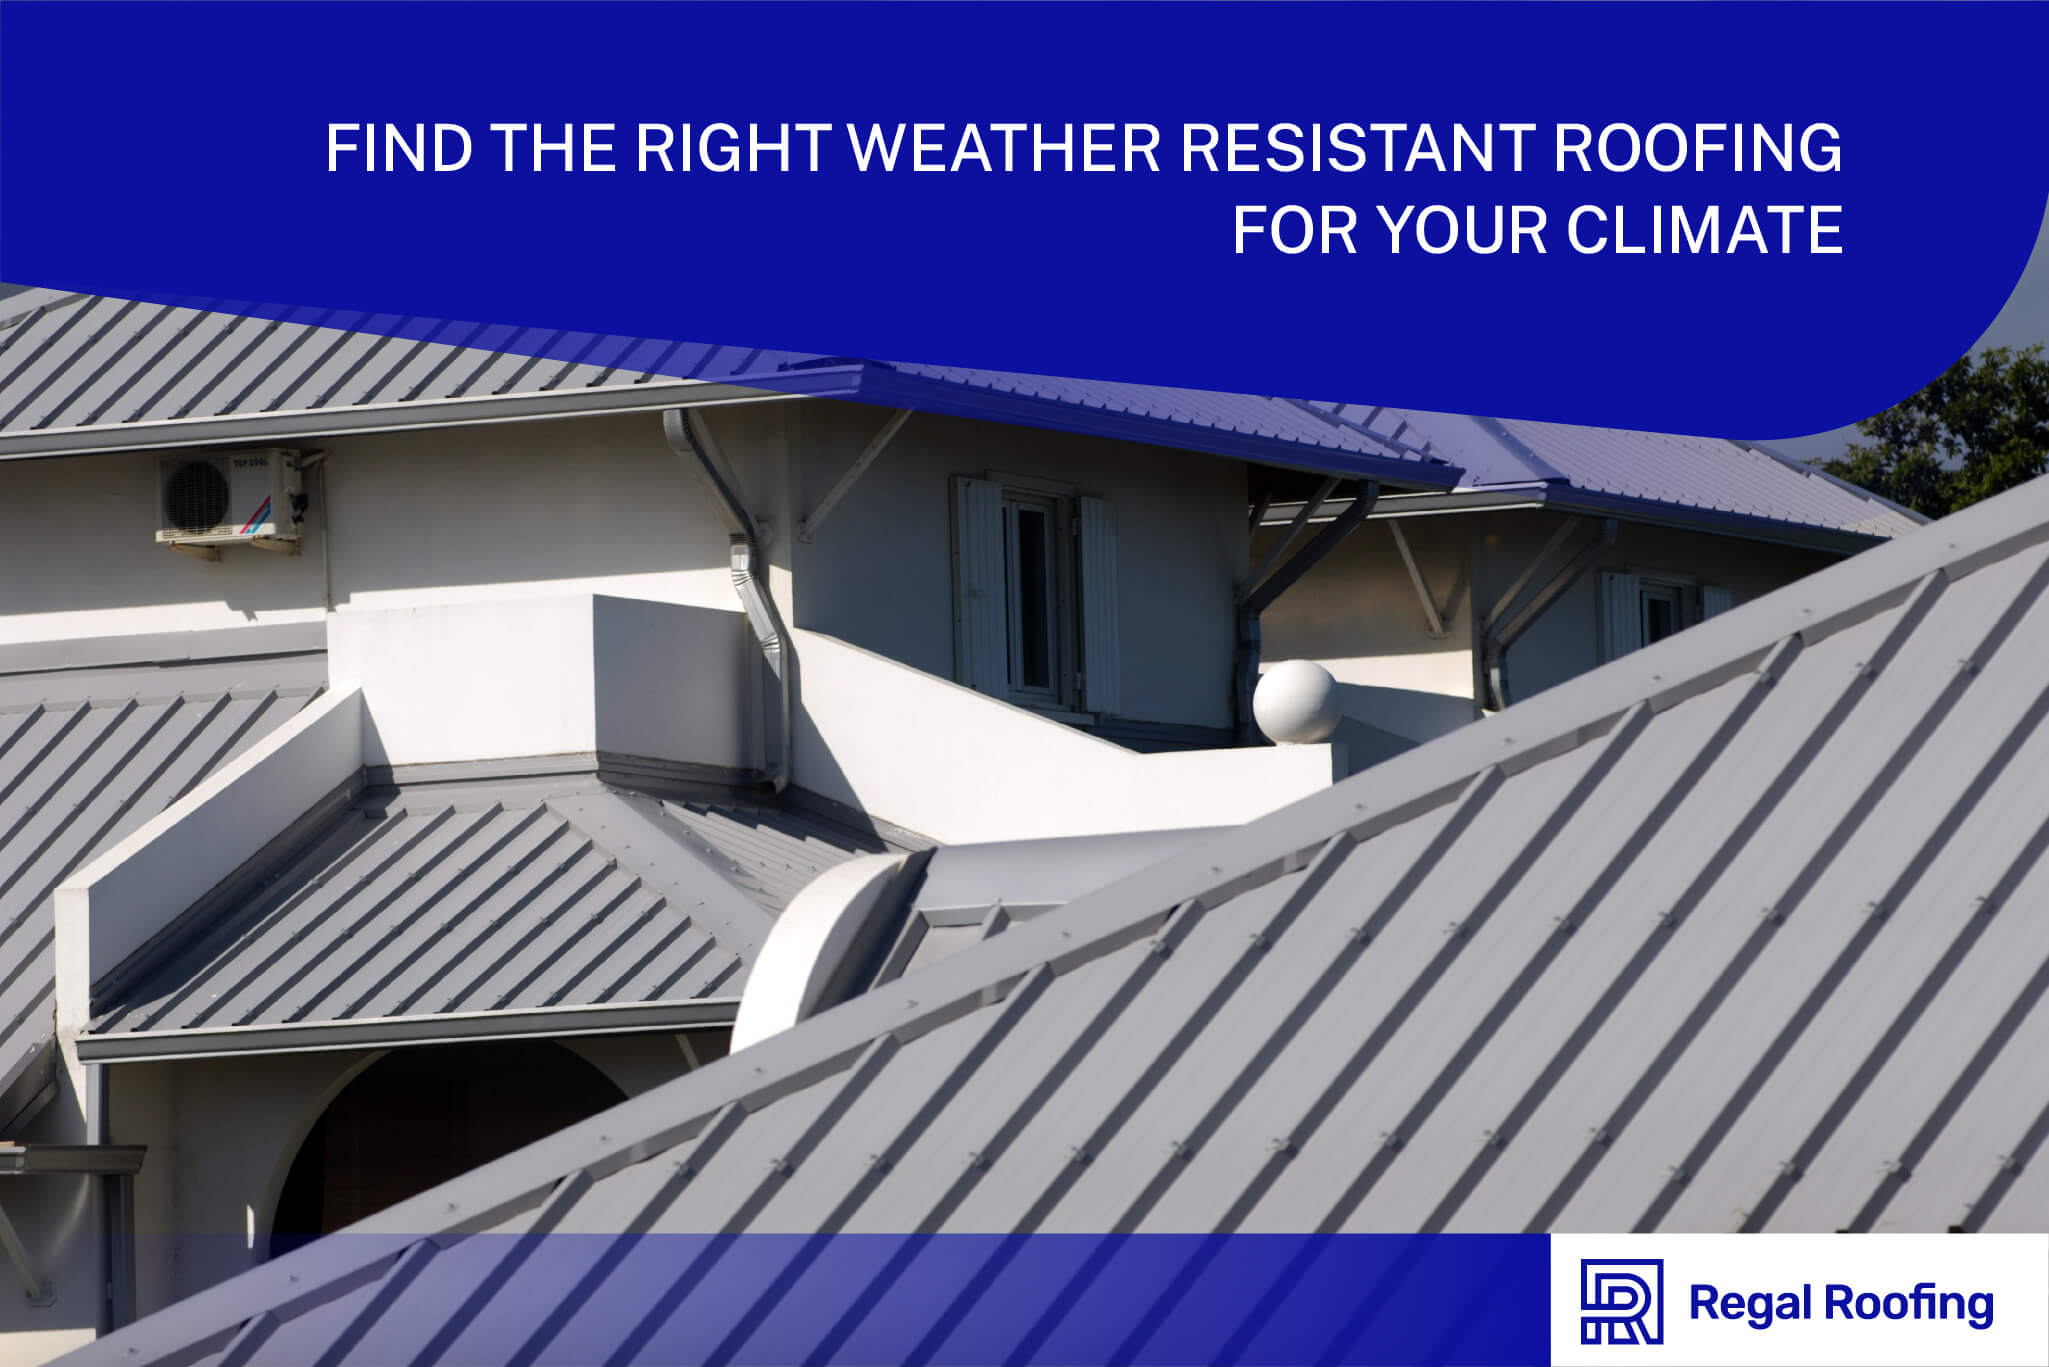 Light gray weather resistant roofing